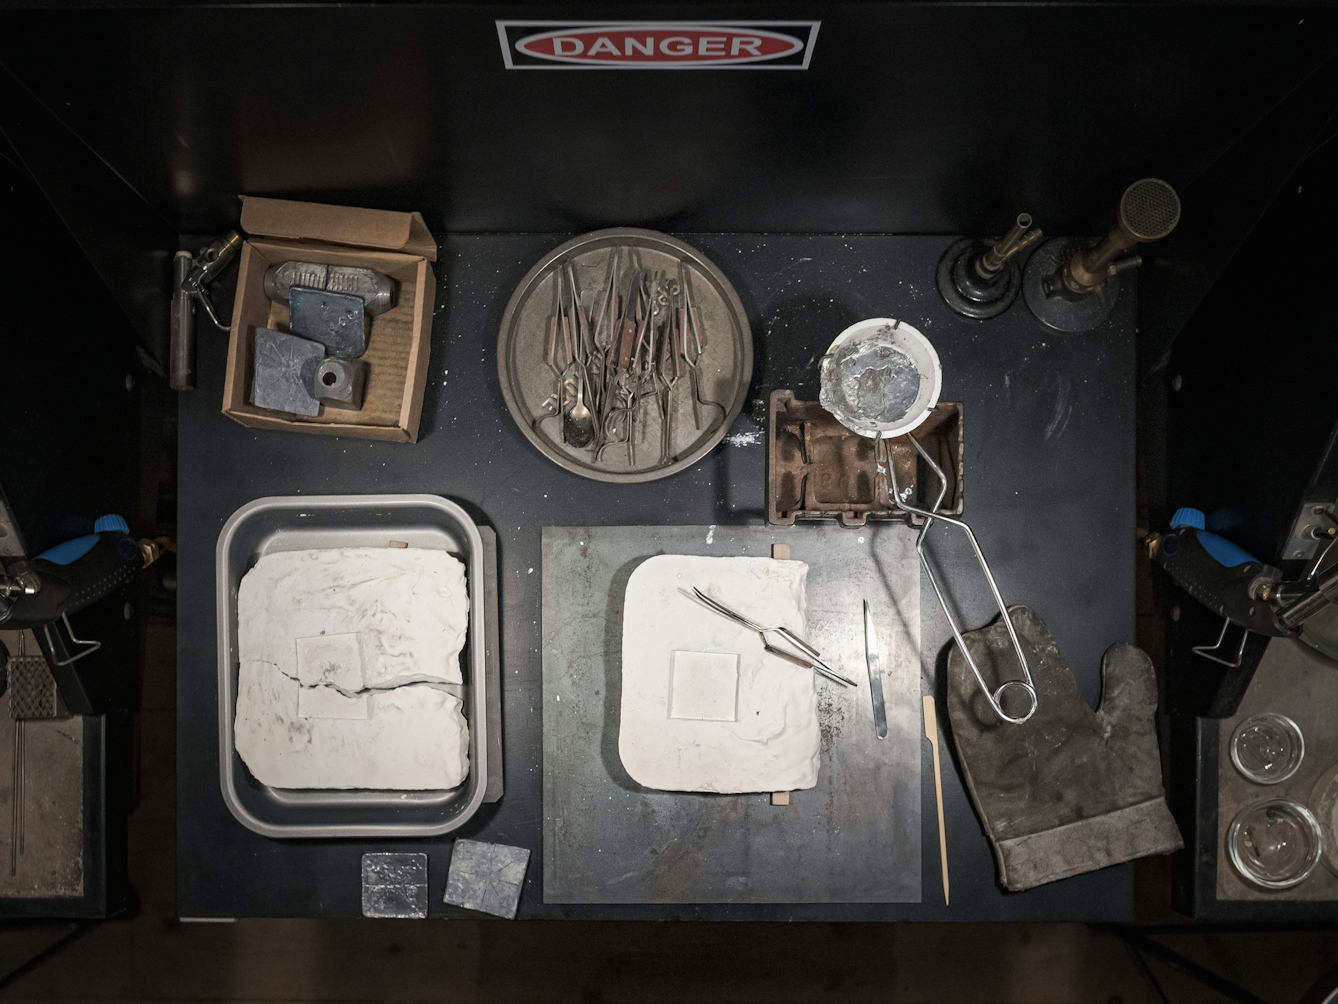 Photograph of instruments required to make the lead healing plate laid out on a workbench.  In the top left is a box containing raw lead.  In the centre us a dish of pliers, to the left is a ceramic bowl in the grip of a pair of tongs.  Inside the bowl is solidified lead, ready to be reheated.  to the bottom are two plaster-cast moulds, one of which is broken. The shape of the mould shows the imprint of a square.  In the bottom right there is a large heat-proof glove.  On the hood above the tools is a sign reading 'DANGER'.